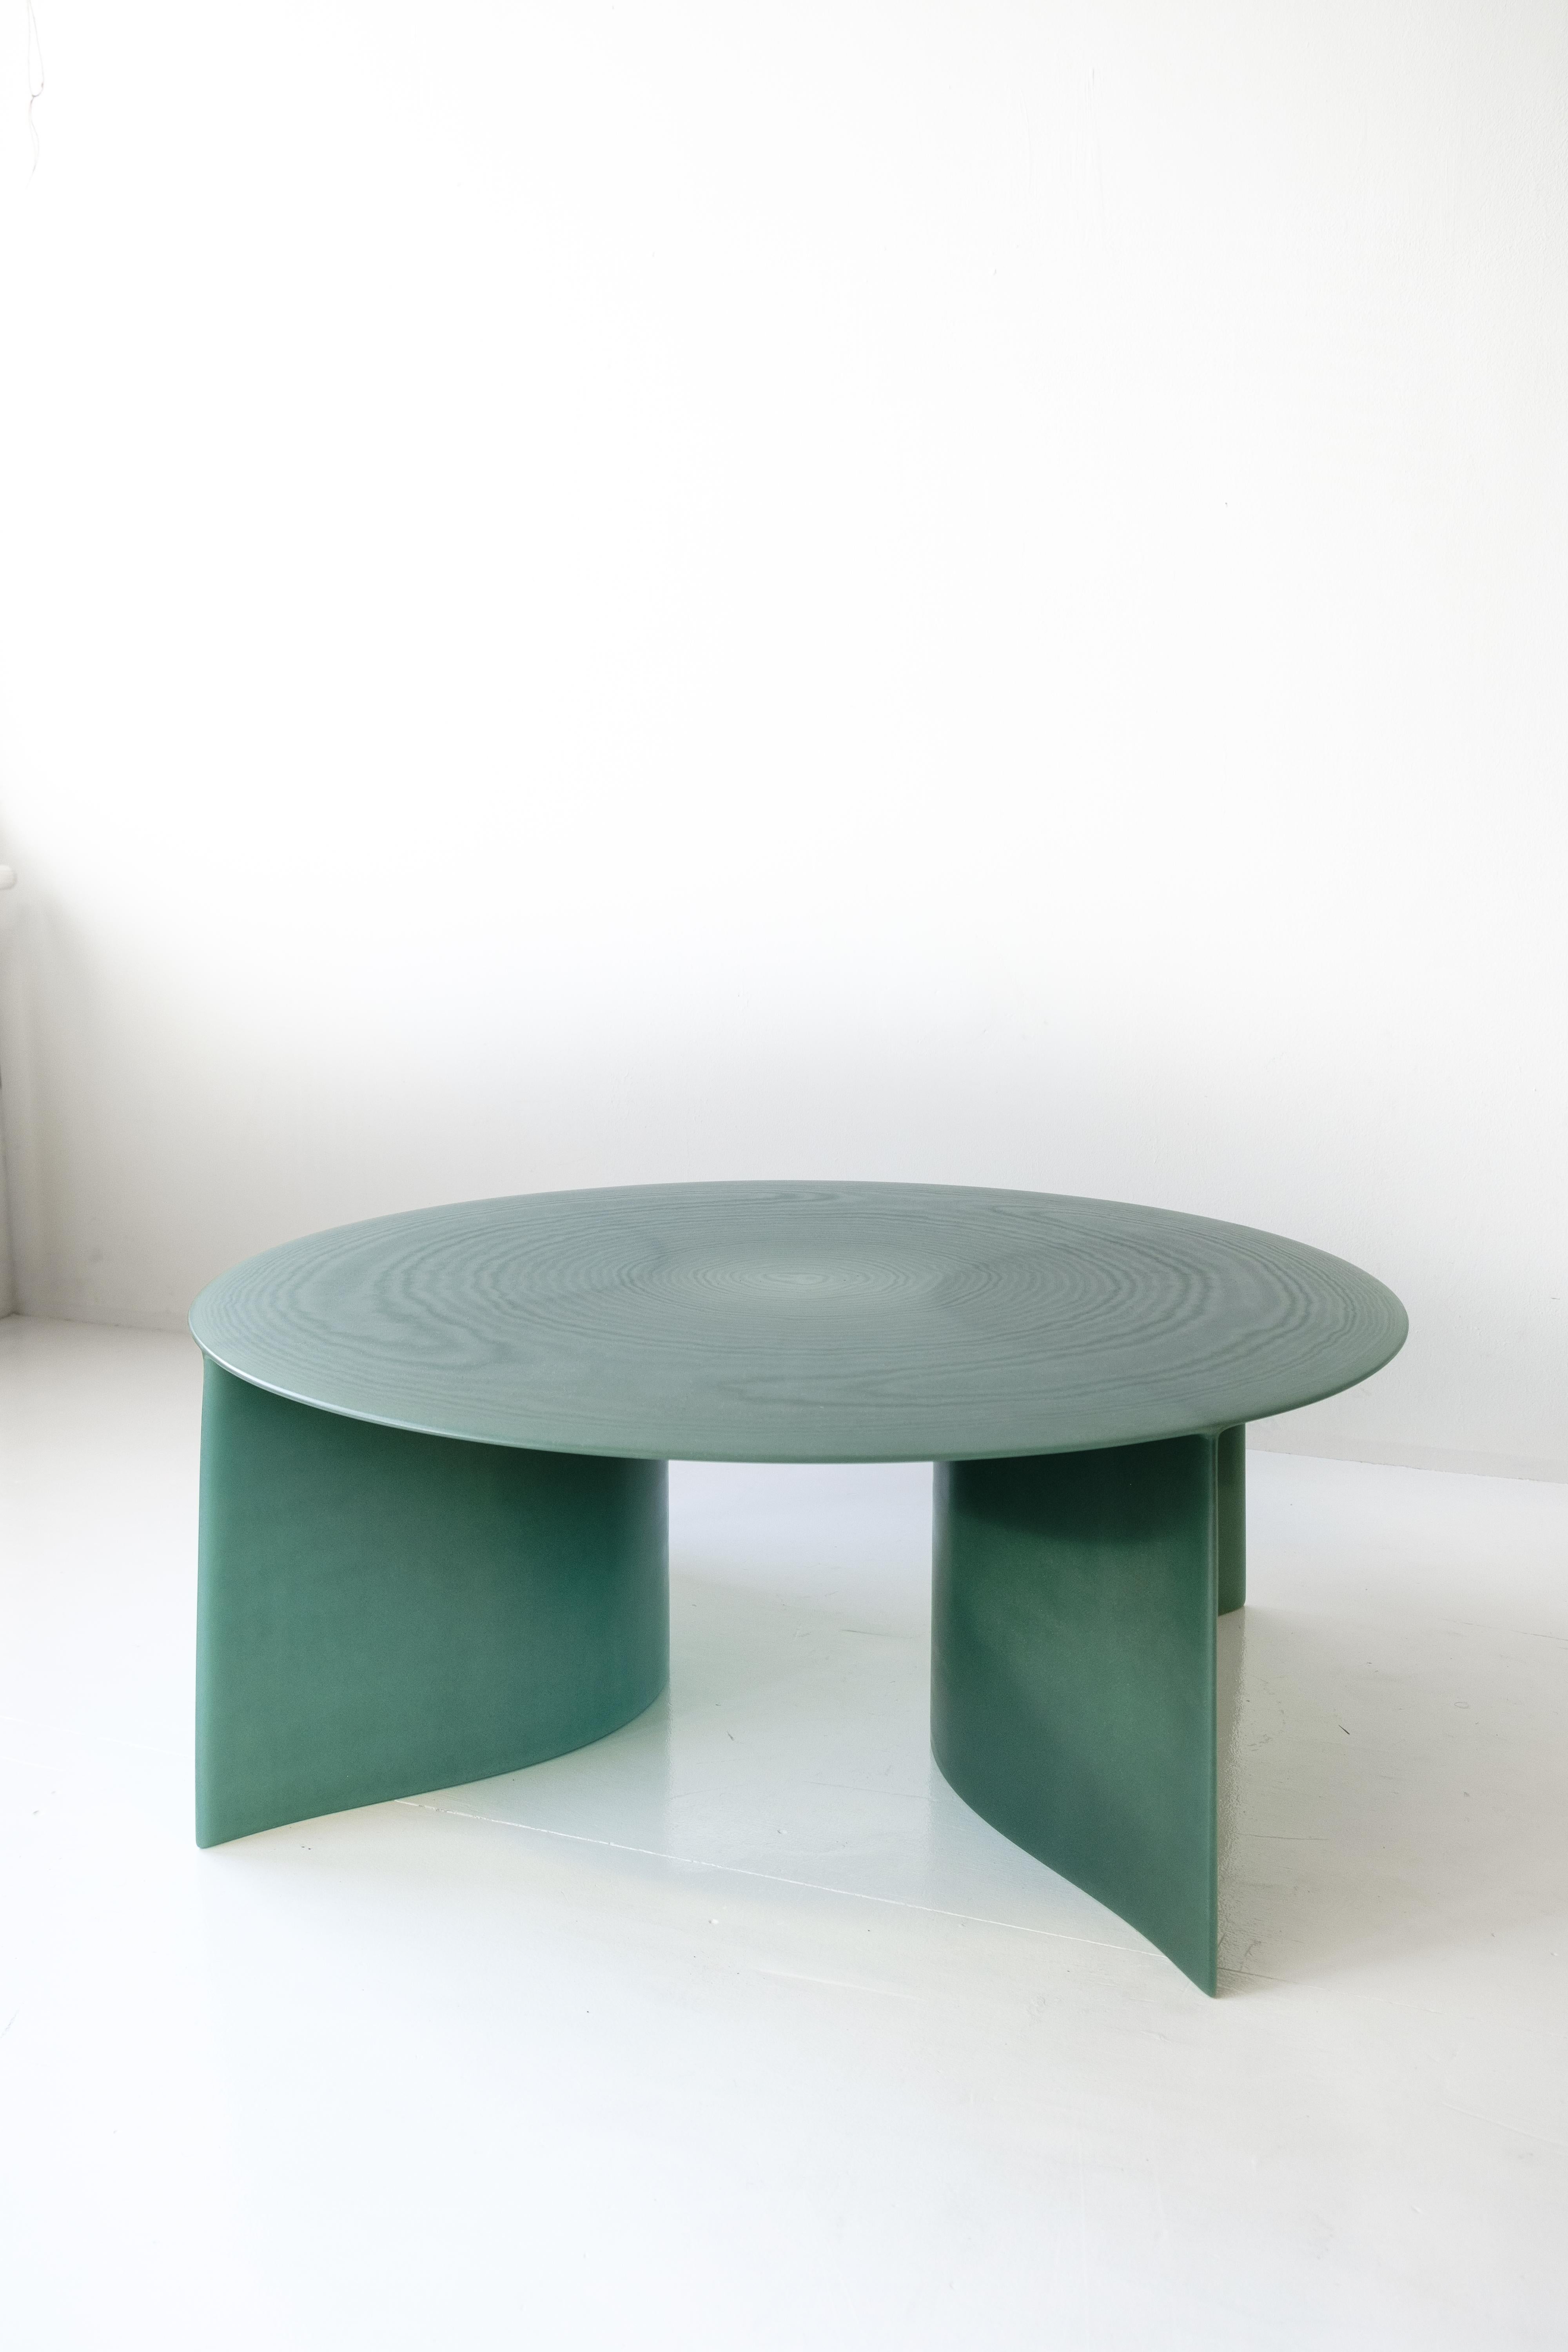 Contemporary Green Fiberglass, New Wave Coffee Table Round 120cm, by Lukas Cober For Sale 8